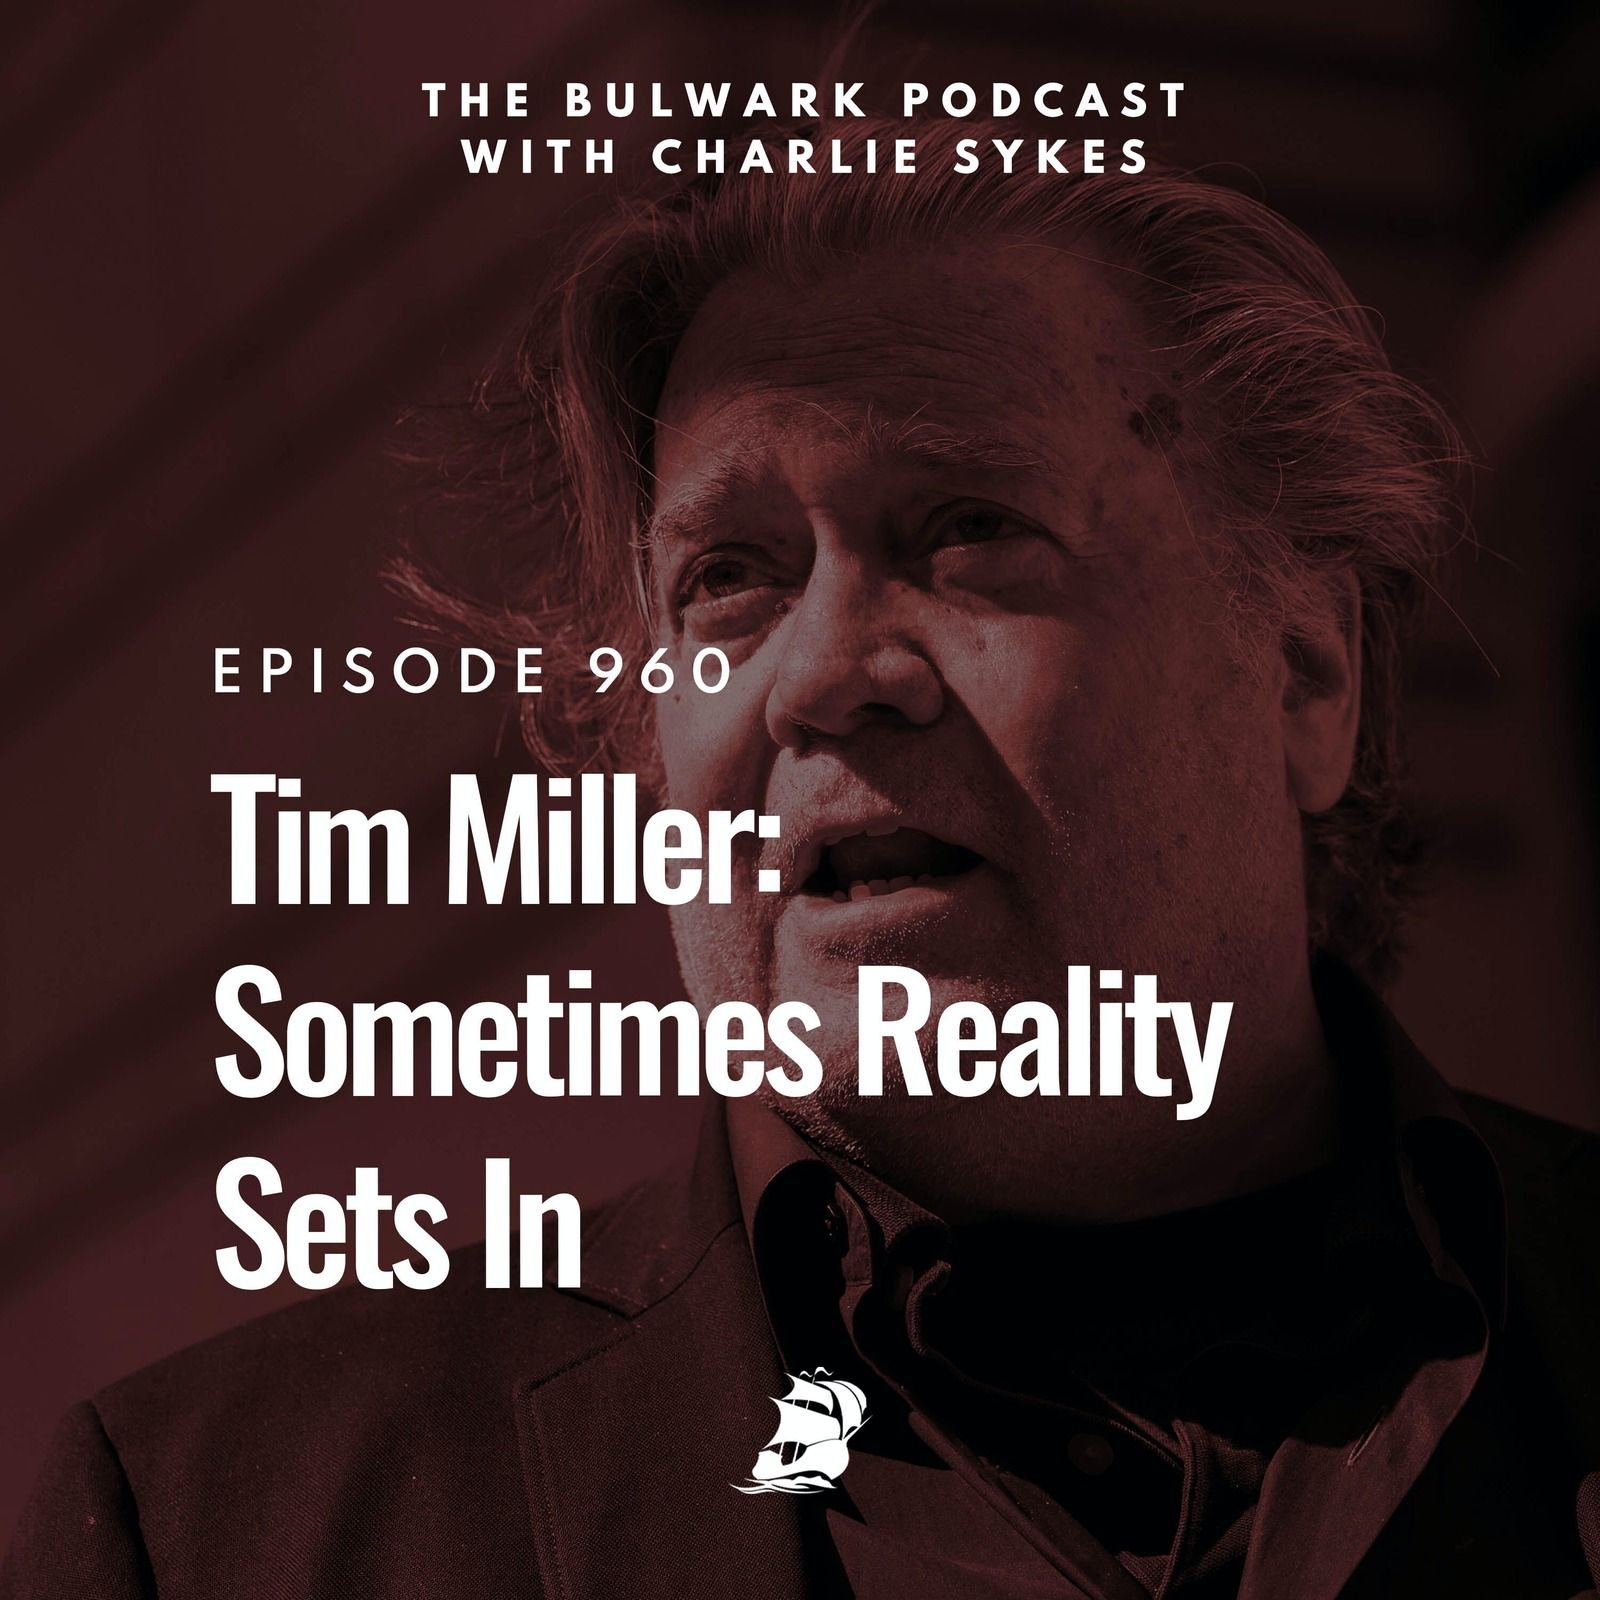 Tim Miller: Sometimes Reality Sets In by The Bulwark Podcast